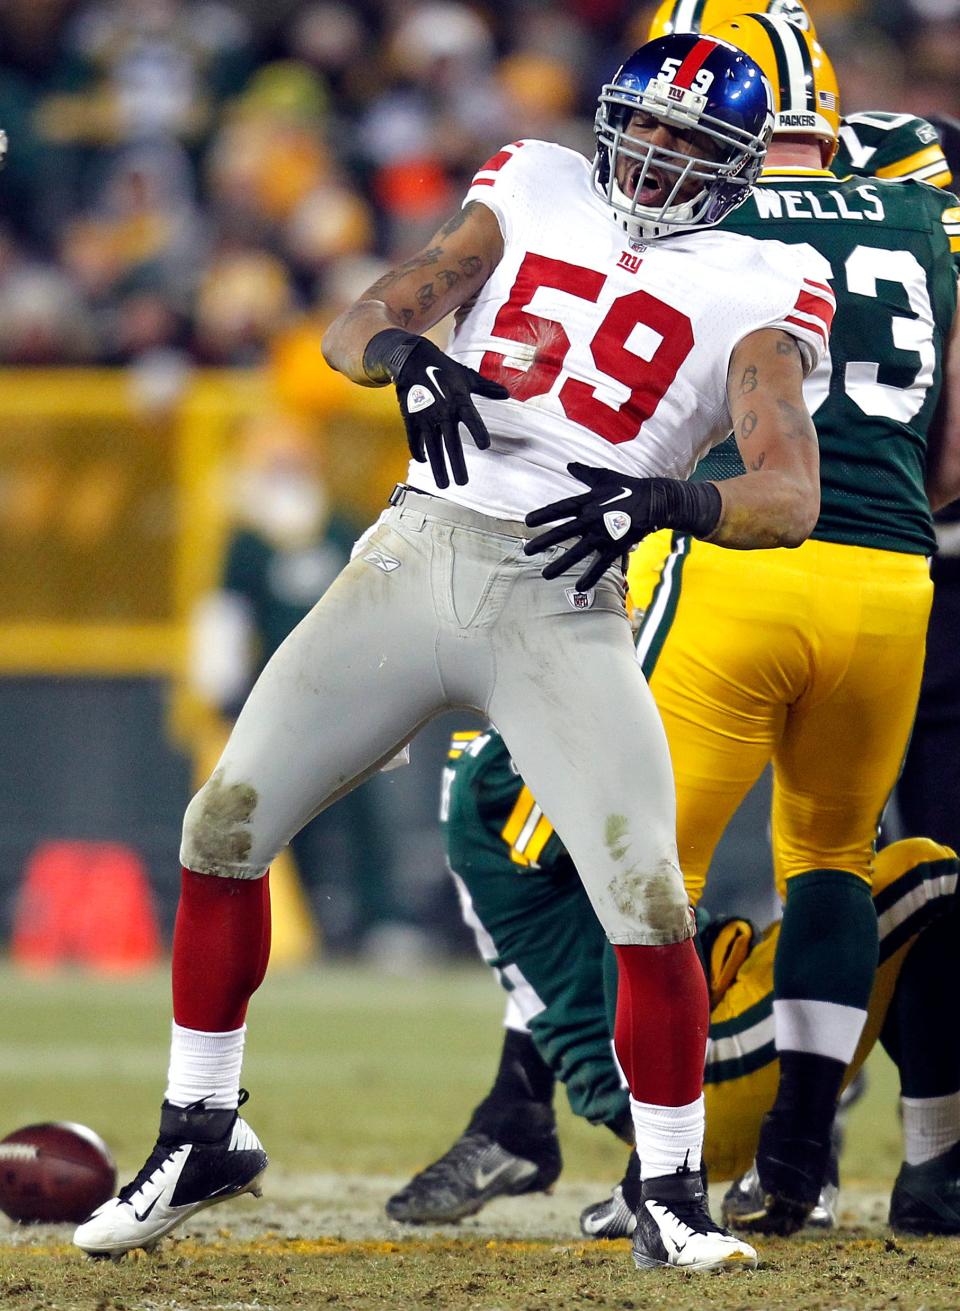 Michael Boley of the New York Giants does the championship belt move after he sacks Aaron Rodgers in the Green Bay Packers loss in a divisional playoff game Jan. 15, 2012. It's one of the rare instances where an opponent has mocked Aaron Rodgers' patented celebration and also won the game.